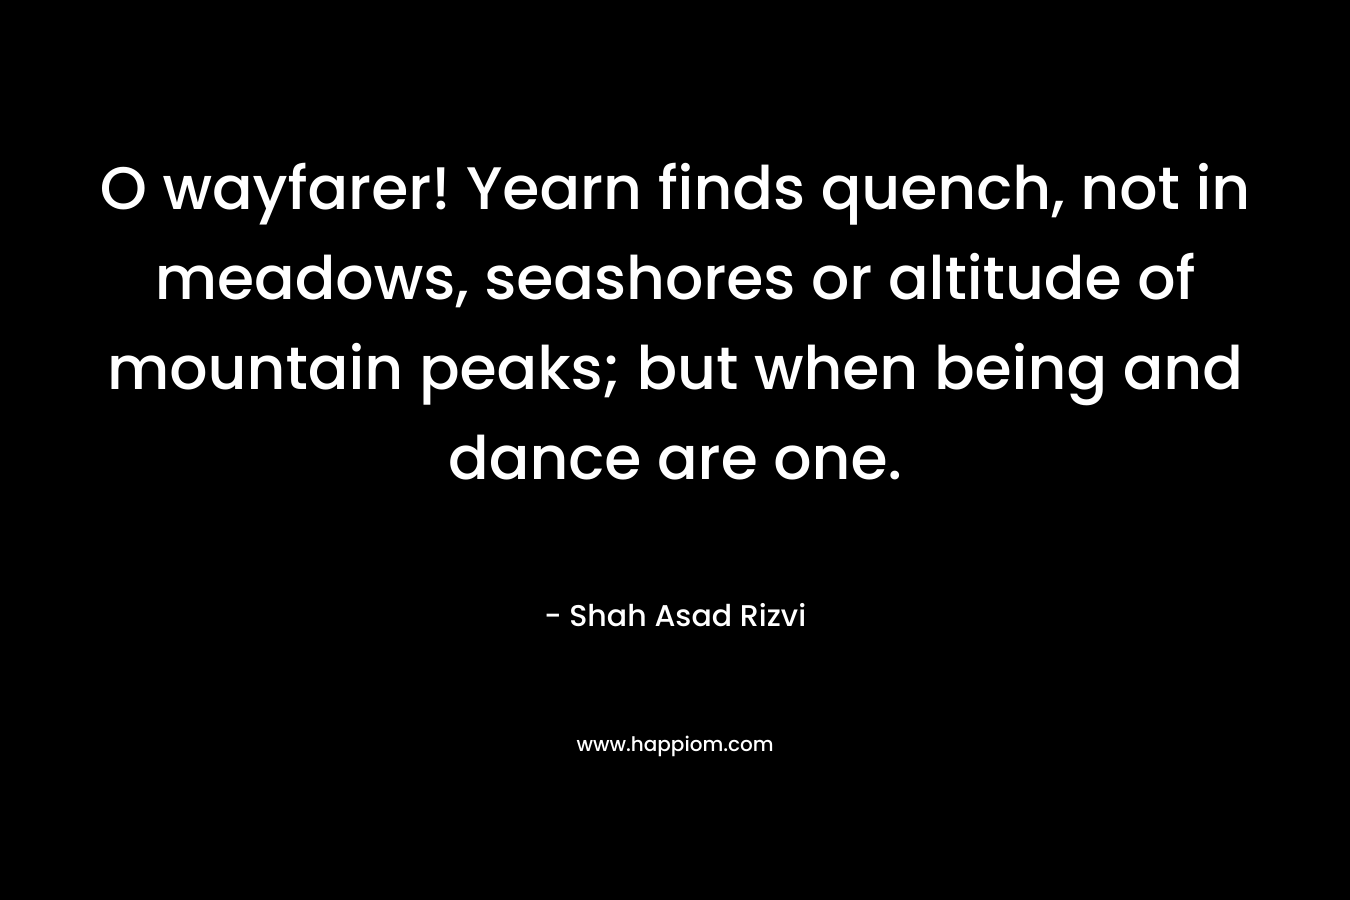 O wayfarer! Yearn finds quench, not in meadows, seashores or altitude of mountain peaks; but when being and dance are one. – Shah Asad Rizvi